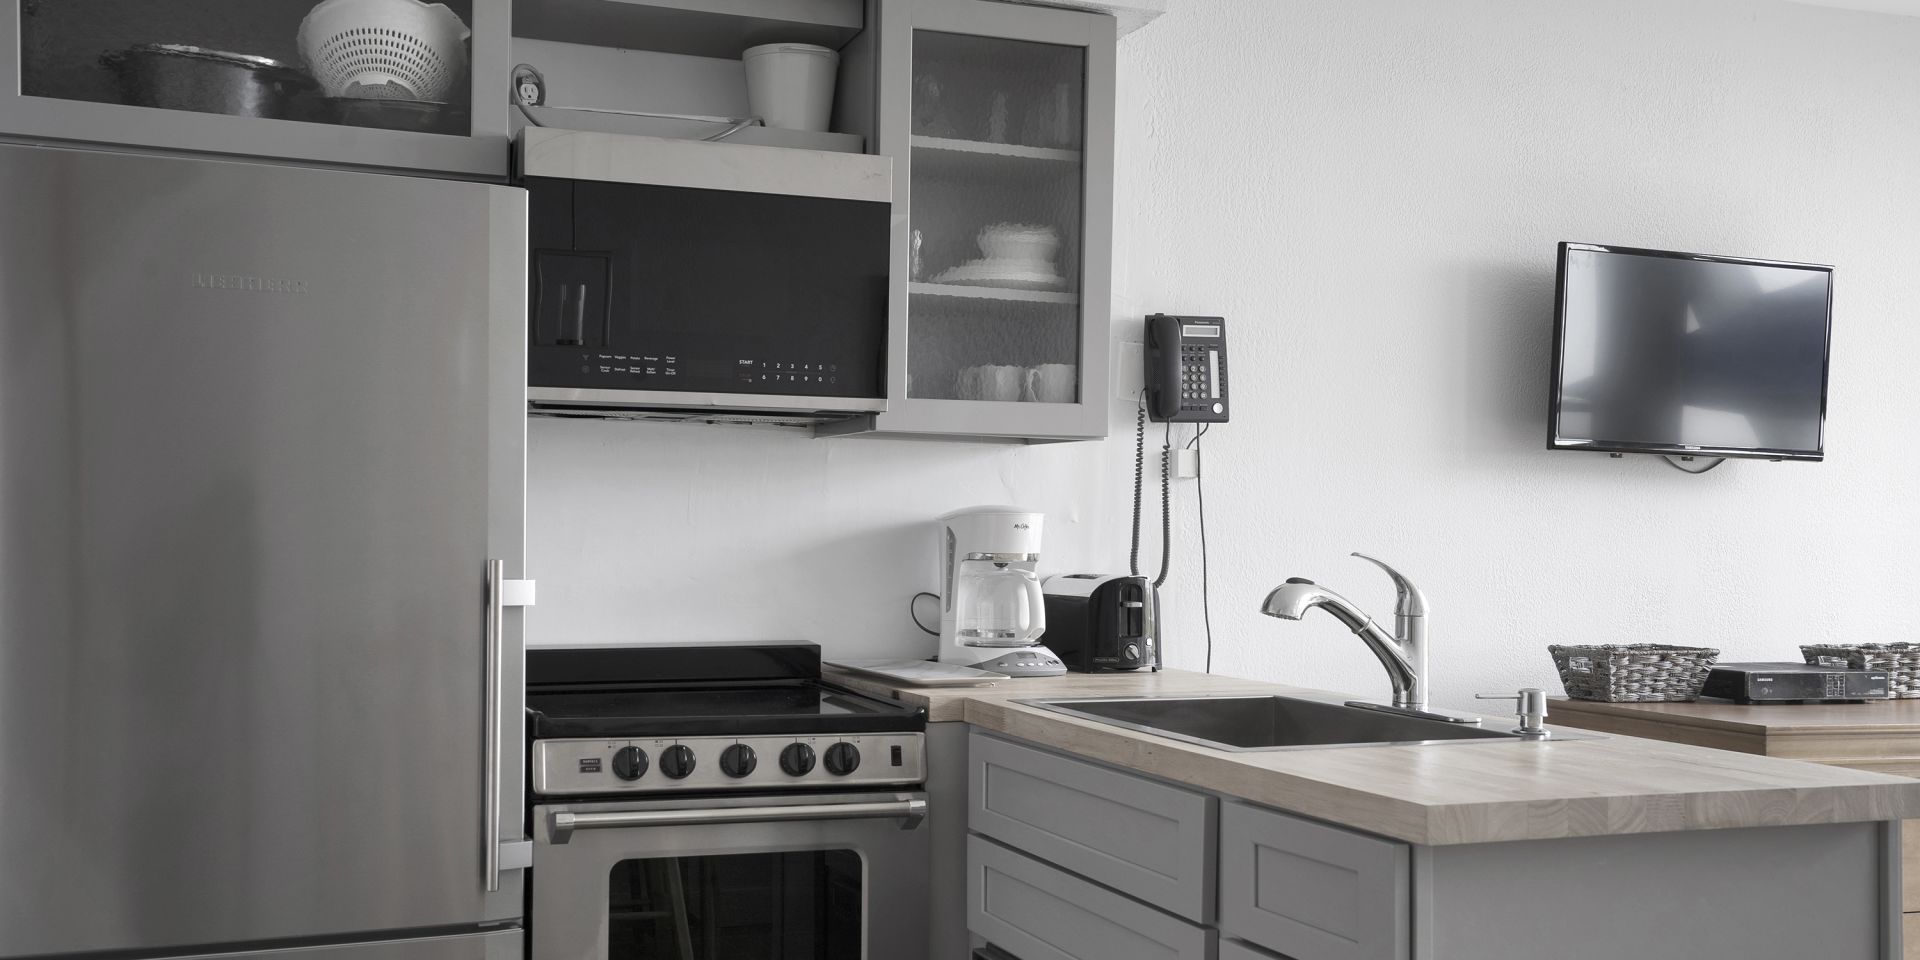 A Stove Top Oven Sitting Inside Of A Kitchen